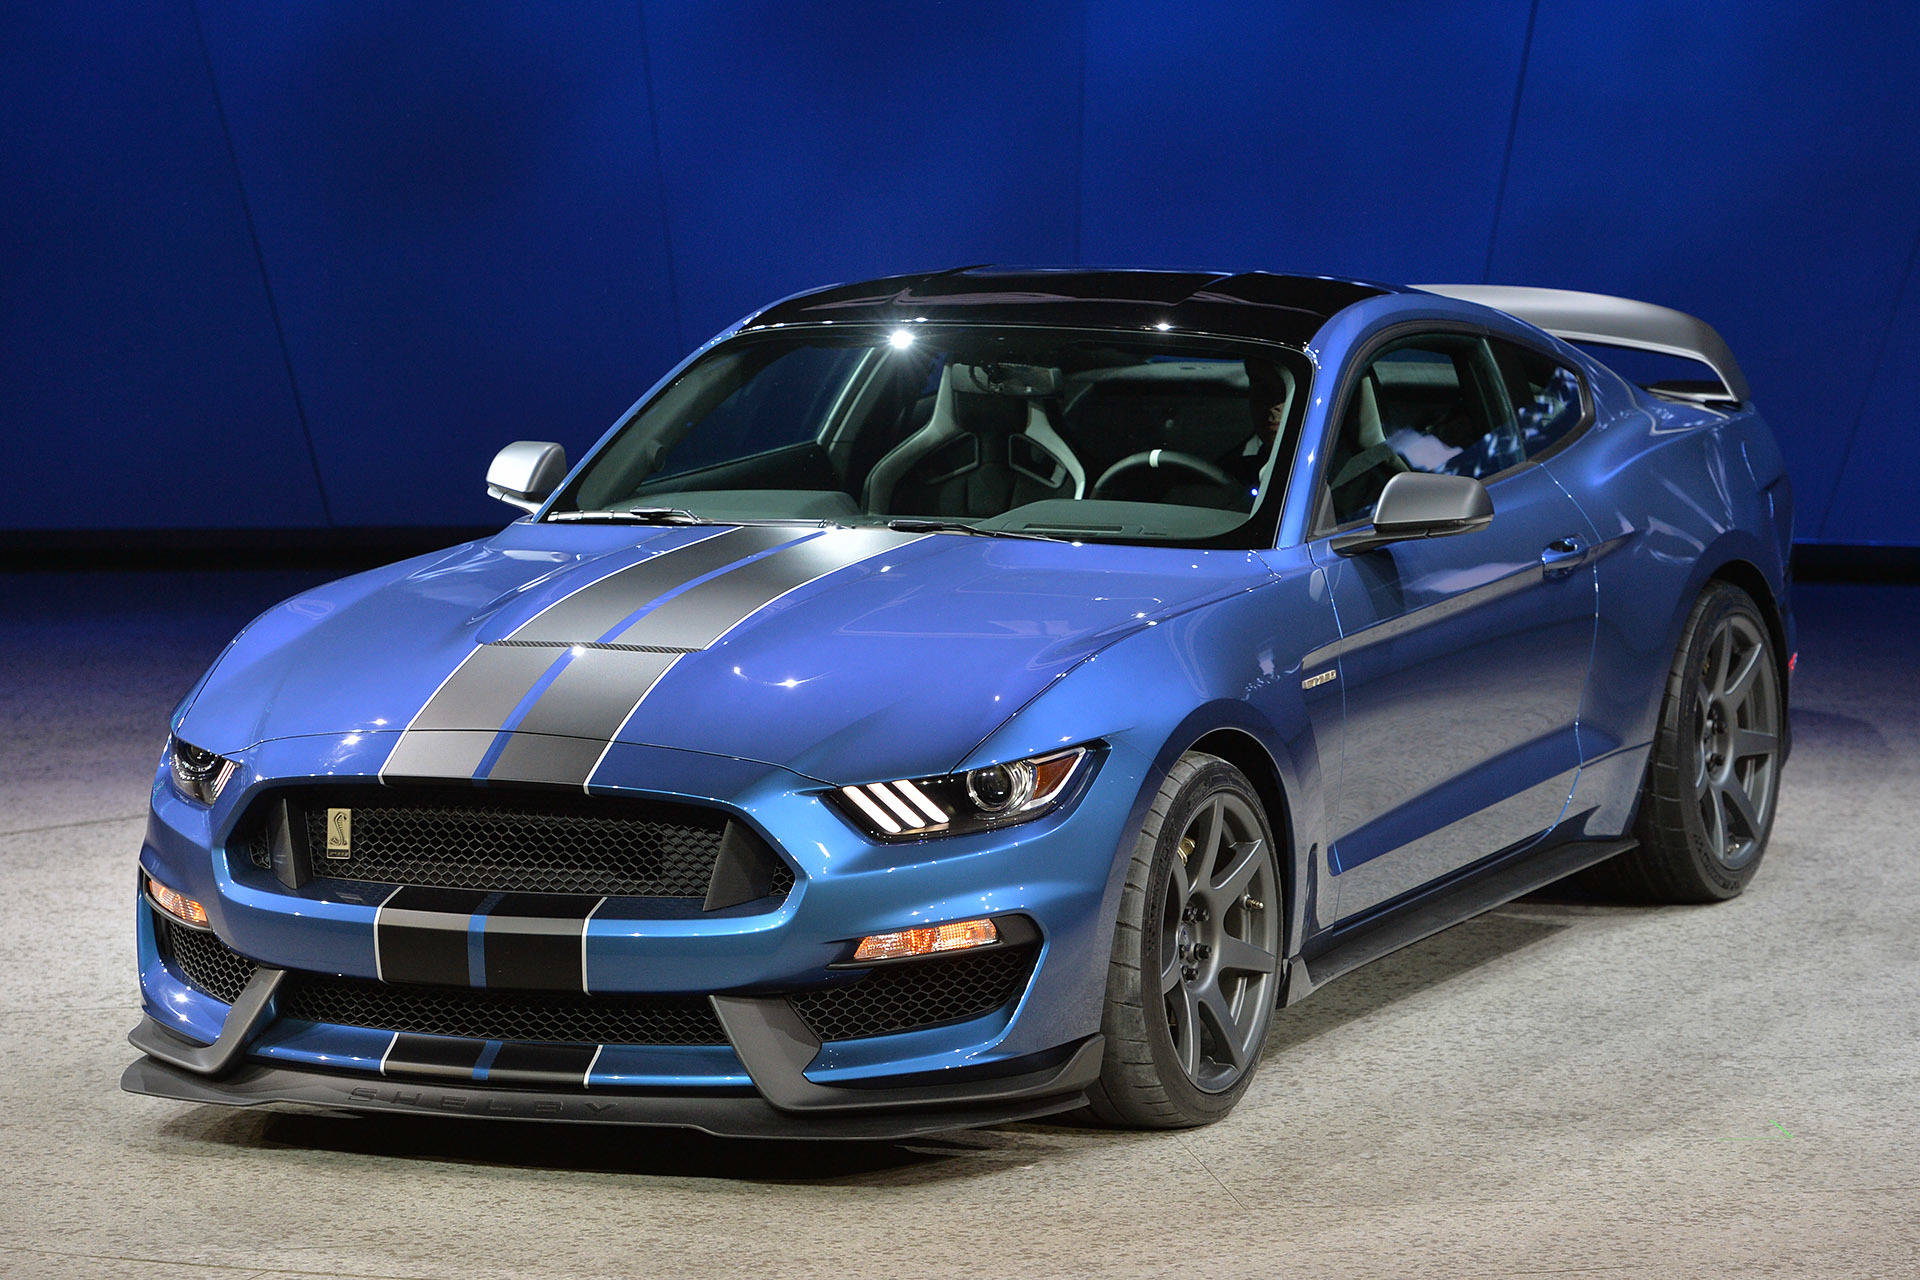 Ford Mustang Shelby Gt350 Wallpaper